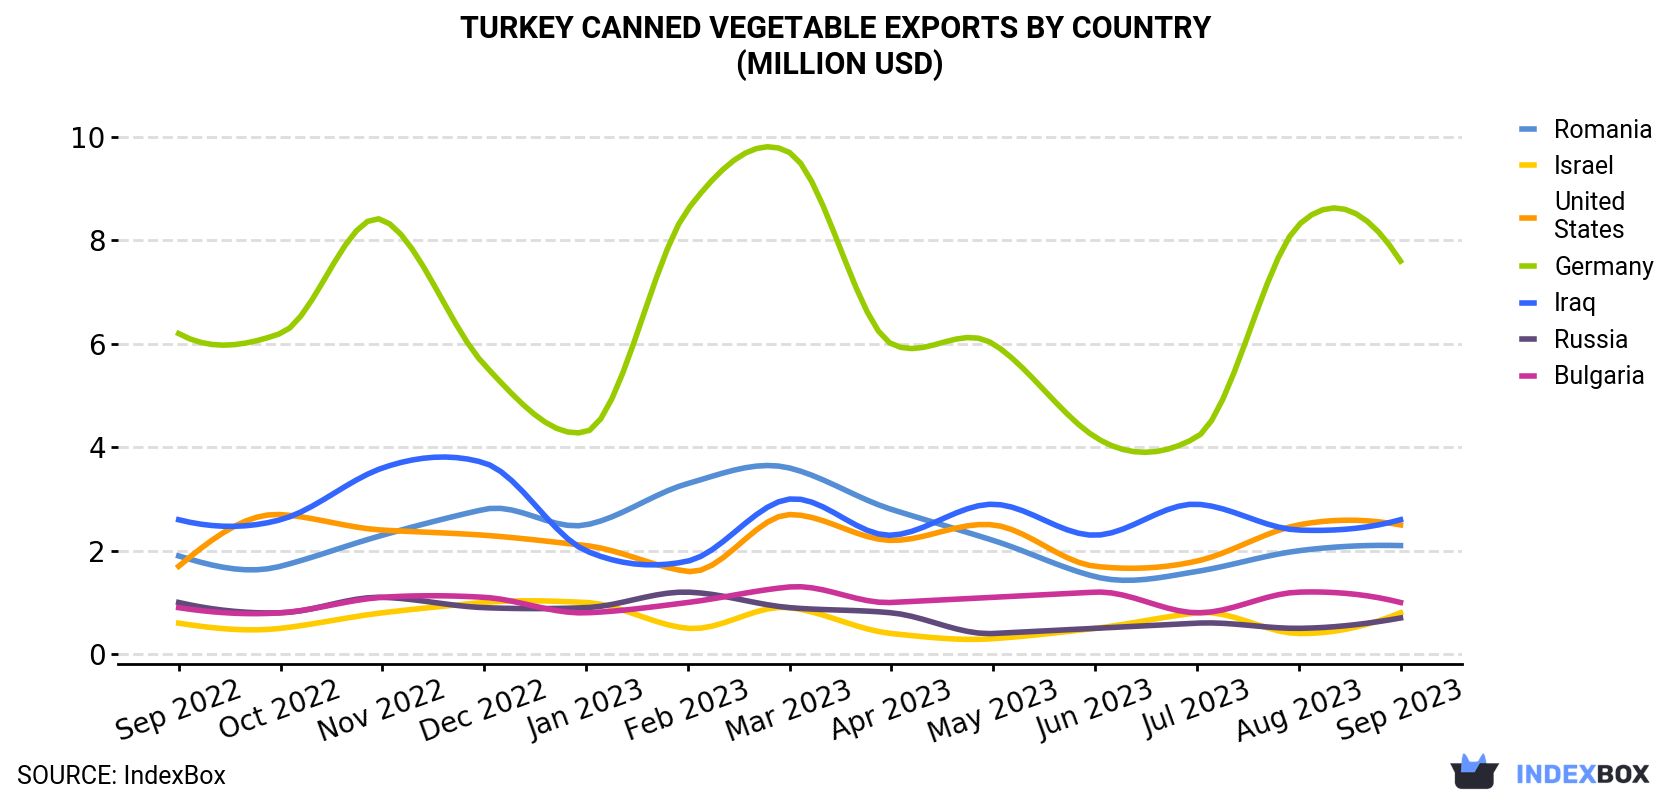 Turkey Canned Vegetable Exports By Country (Million USD)